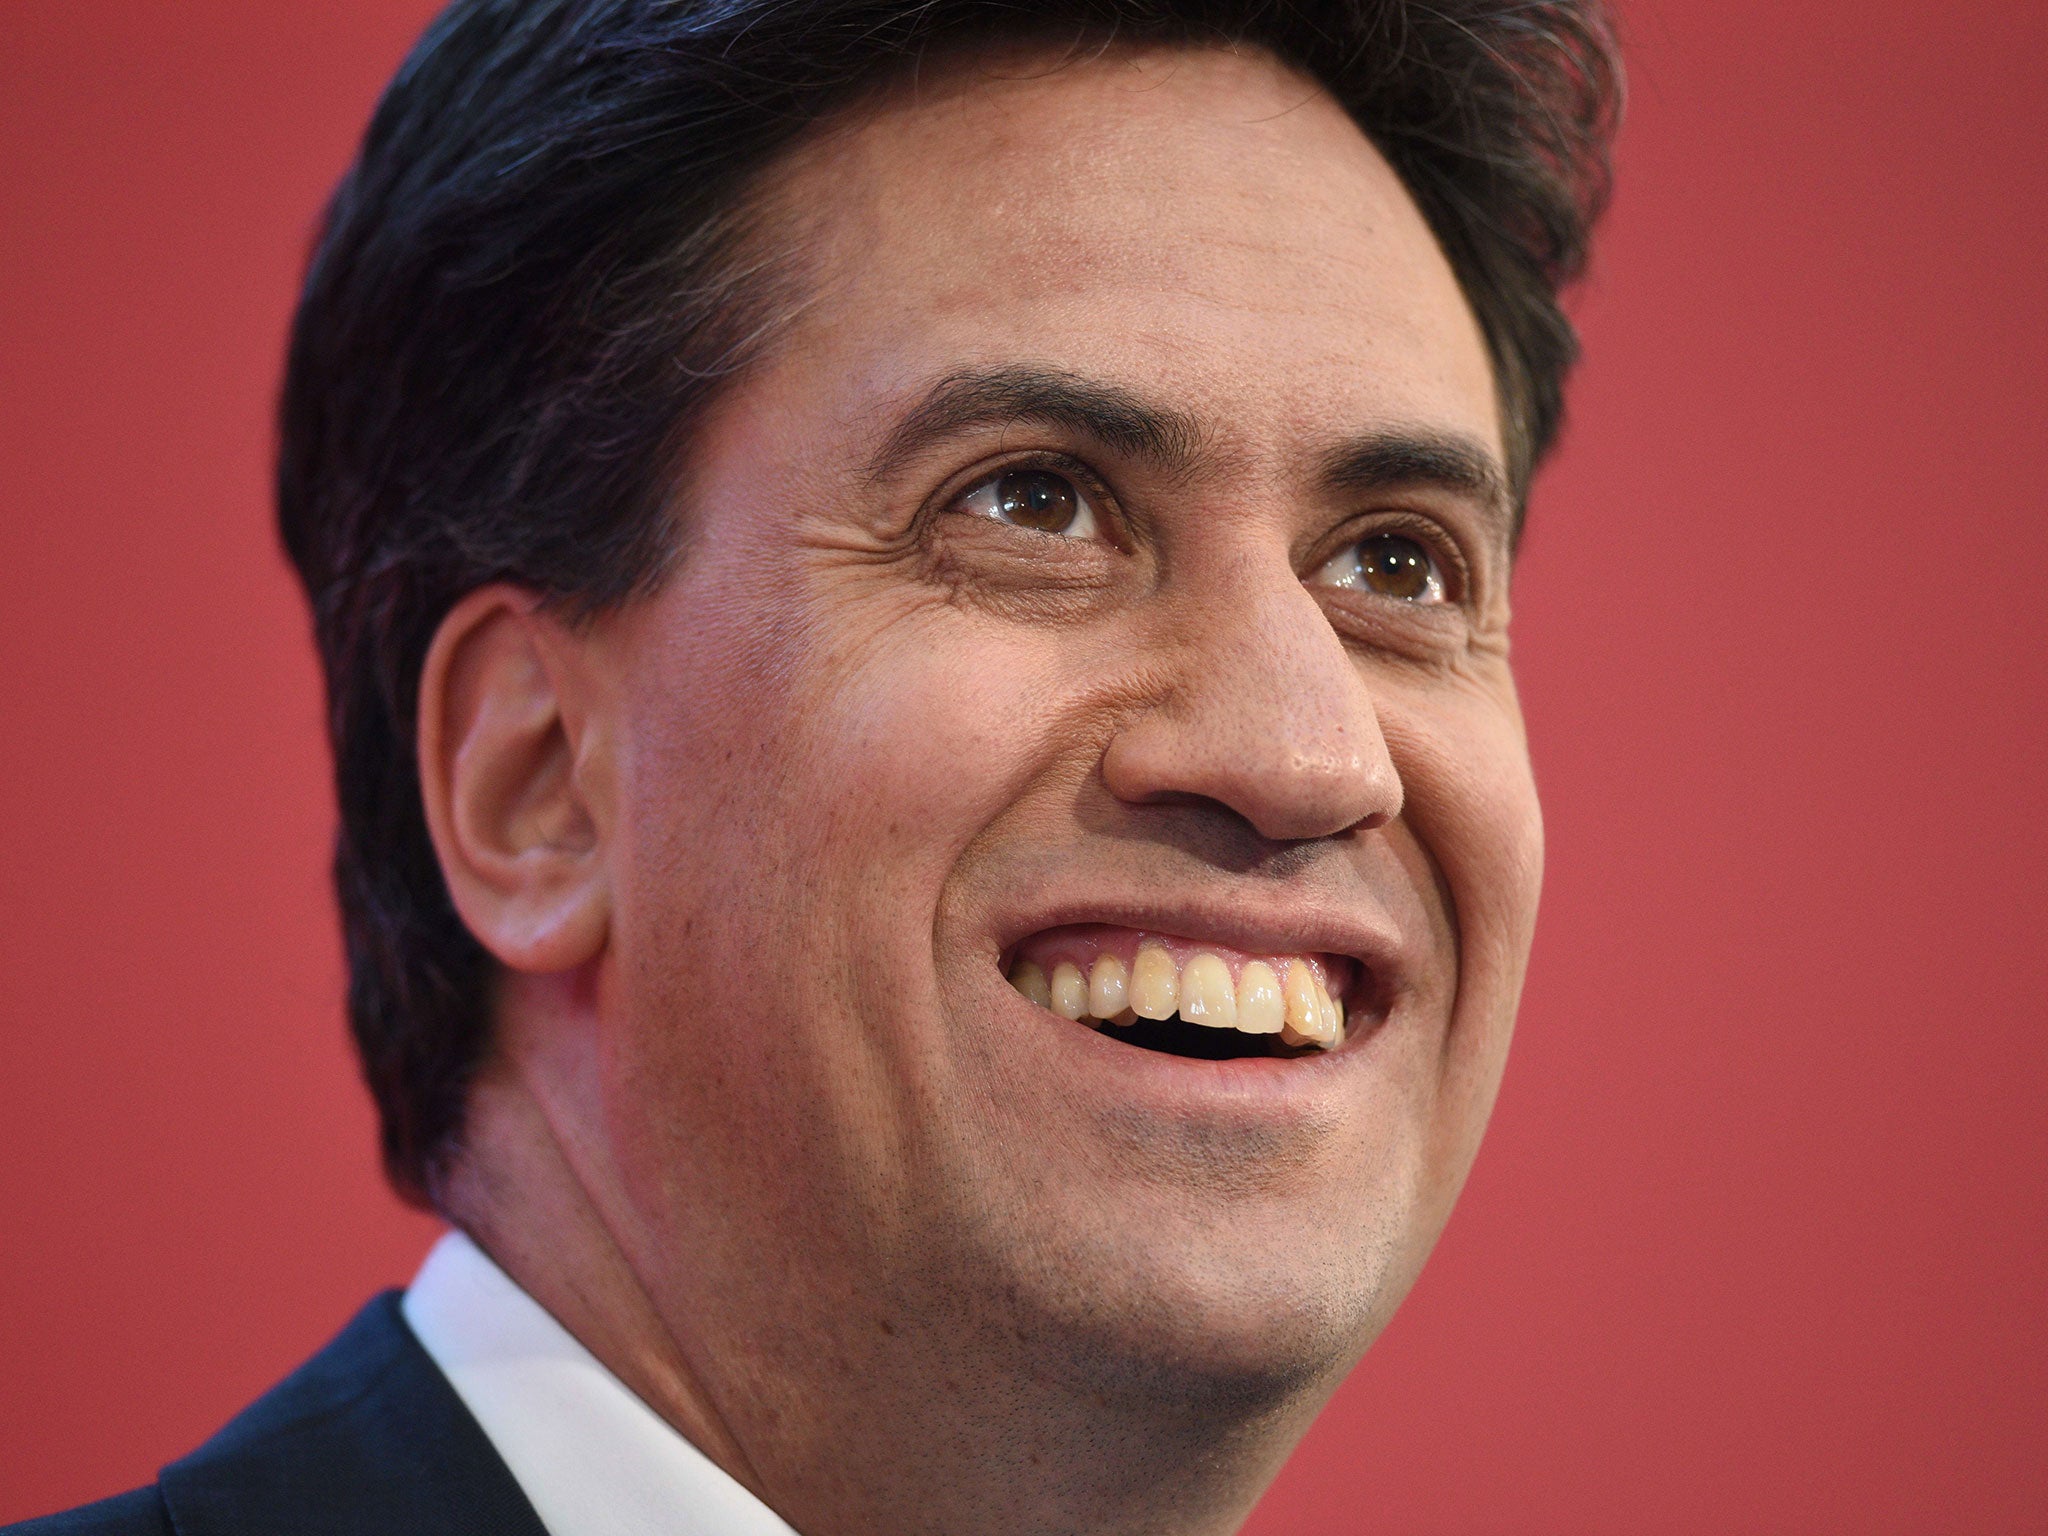 Ed Miliband addresses an audience in the Brooks Building of Manchester Metropolitan University on April 21, 2015